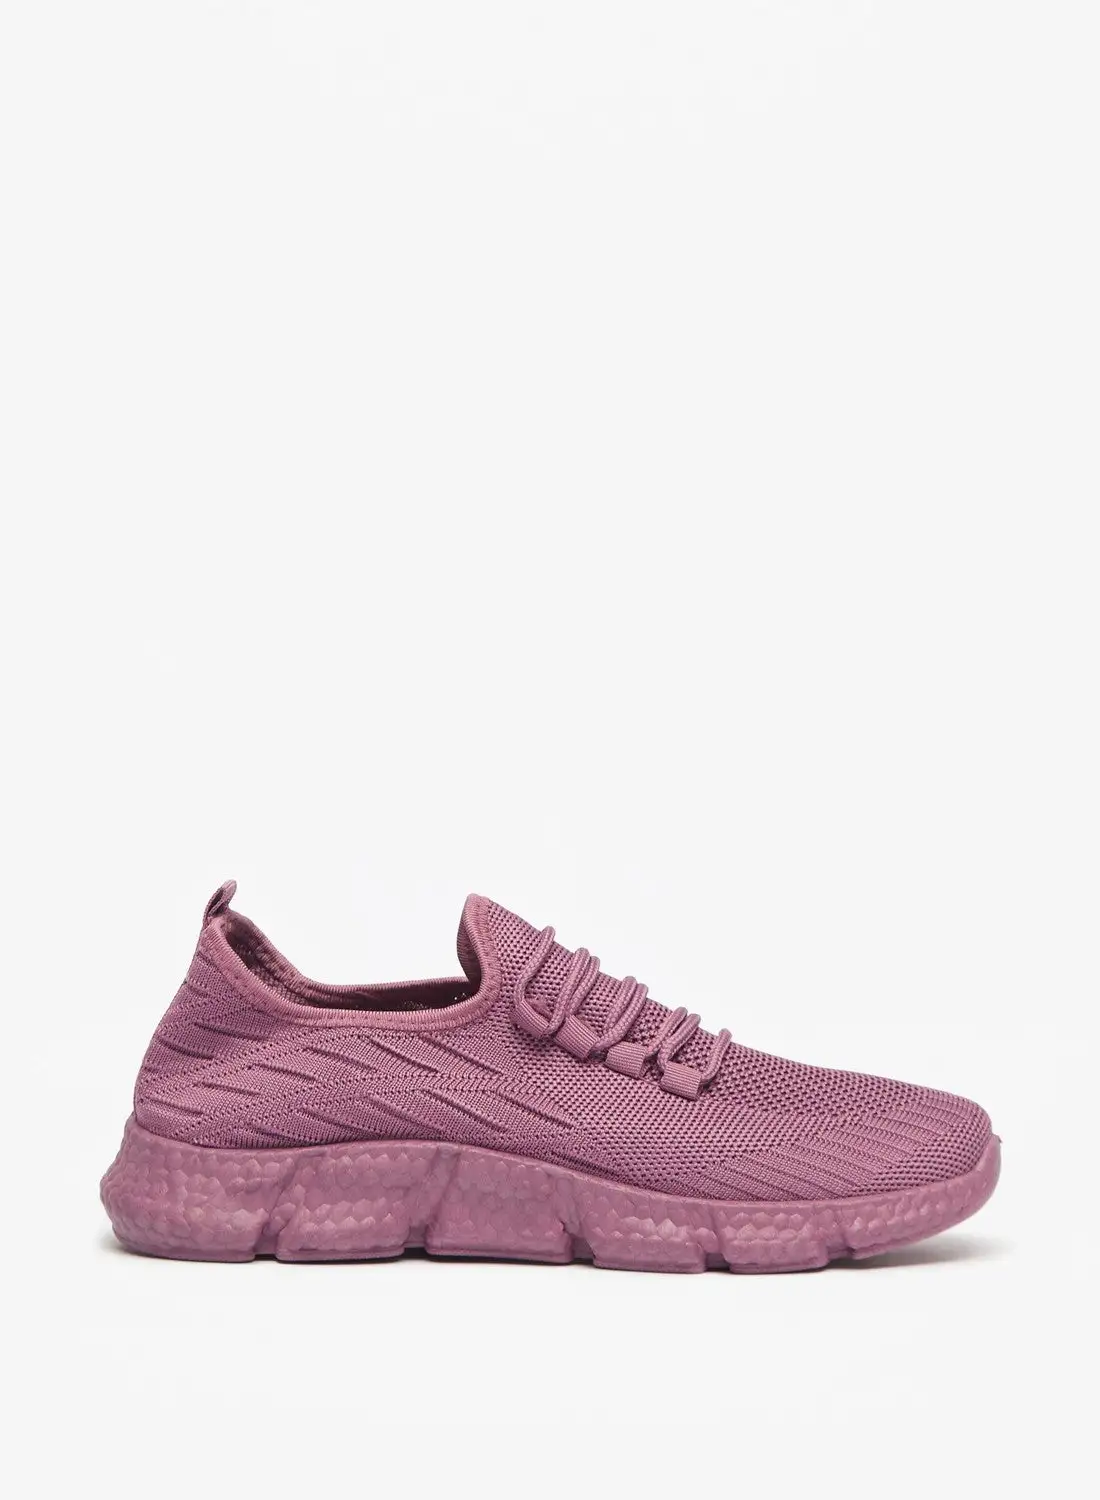 shoexpress Girls Textured Sports Shoes with Lace Up Closure Purple